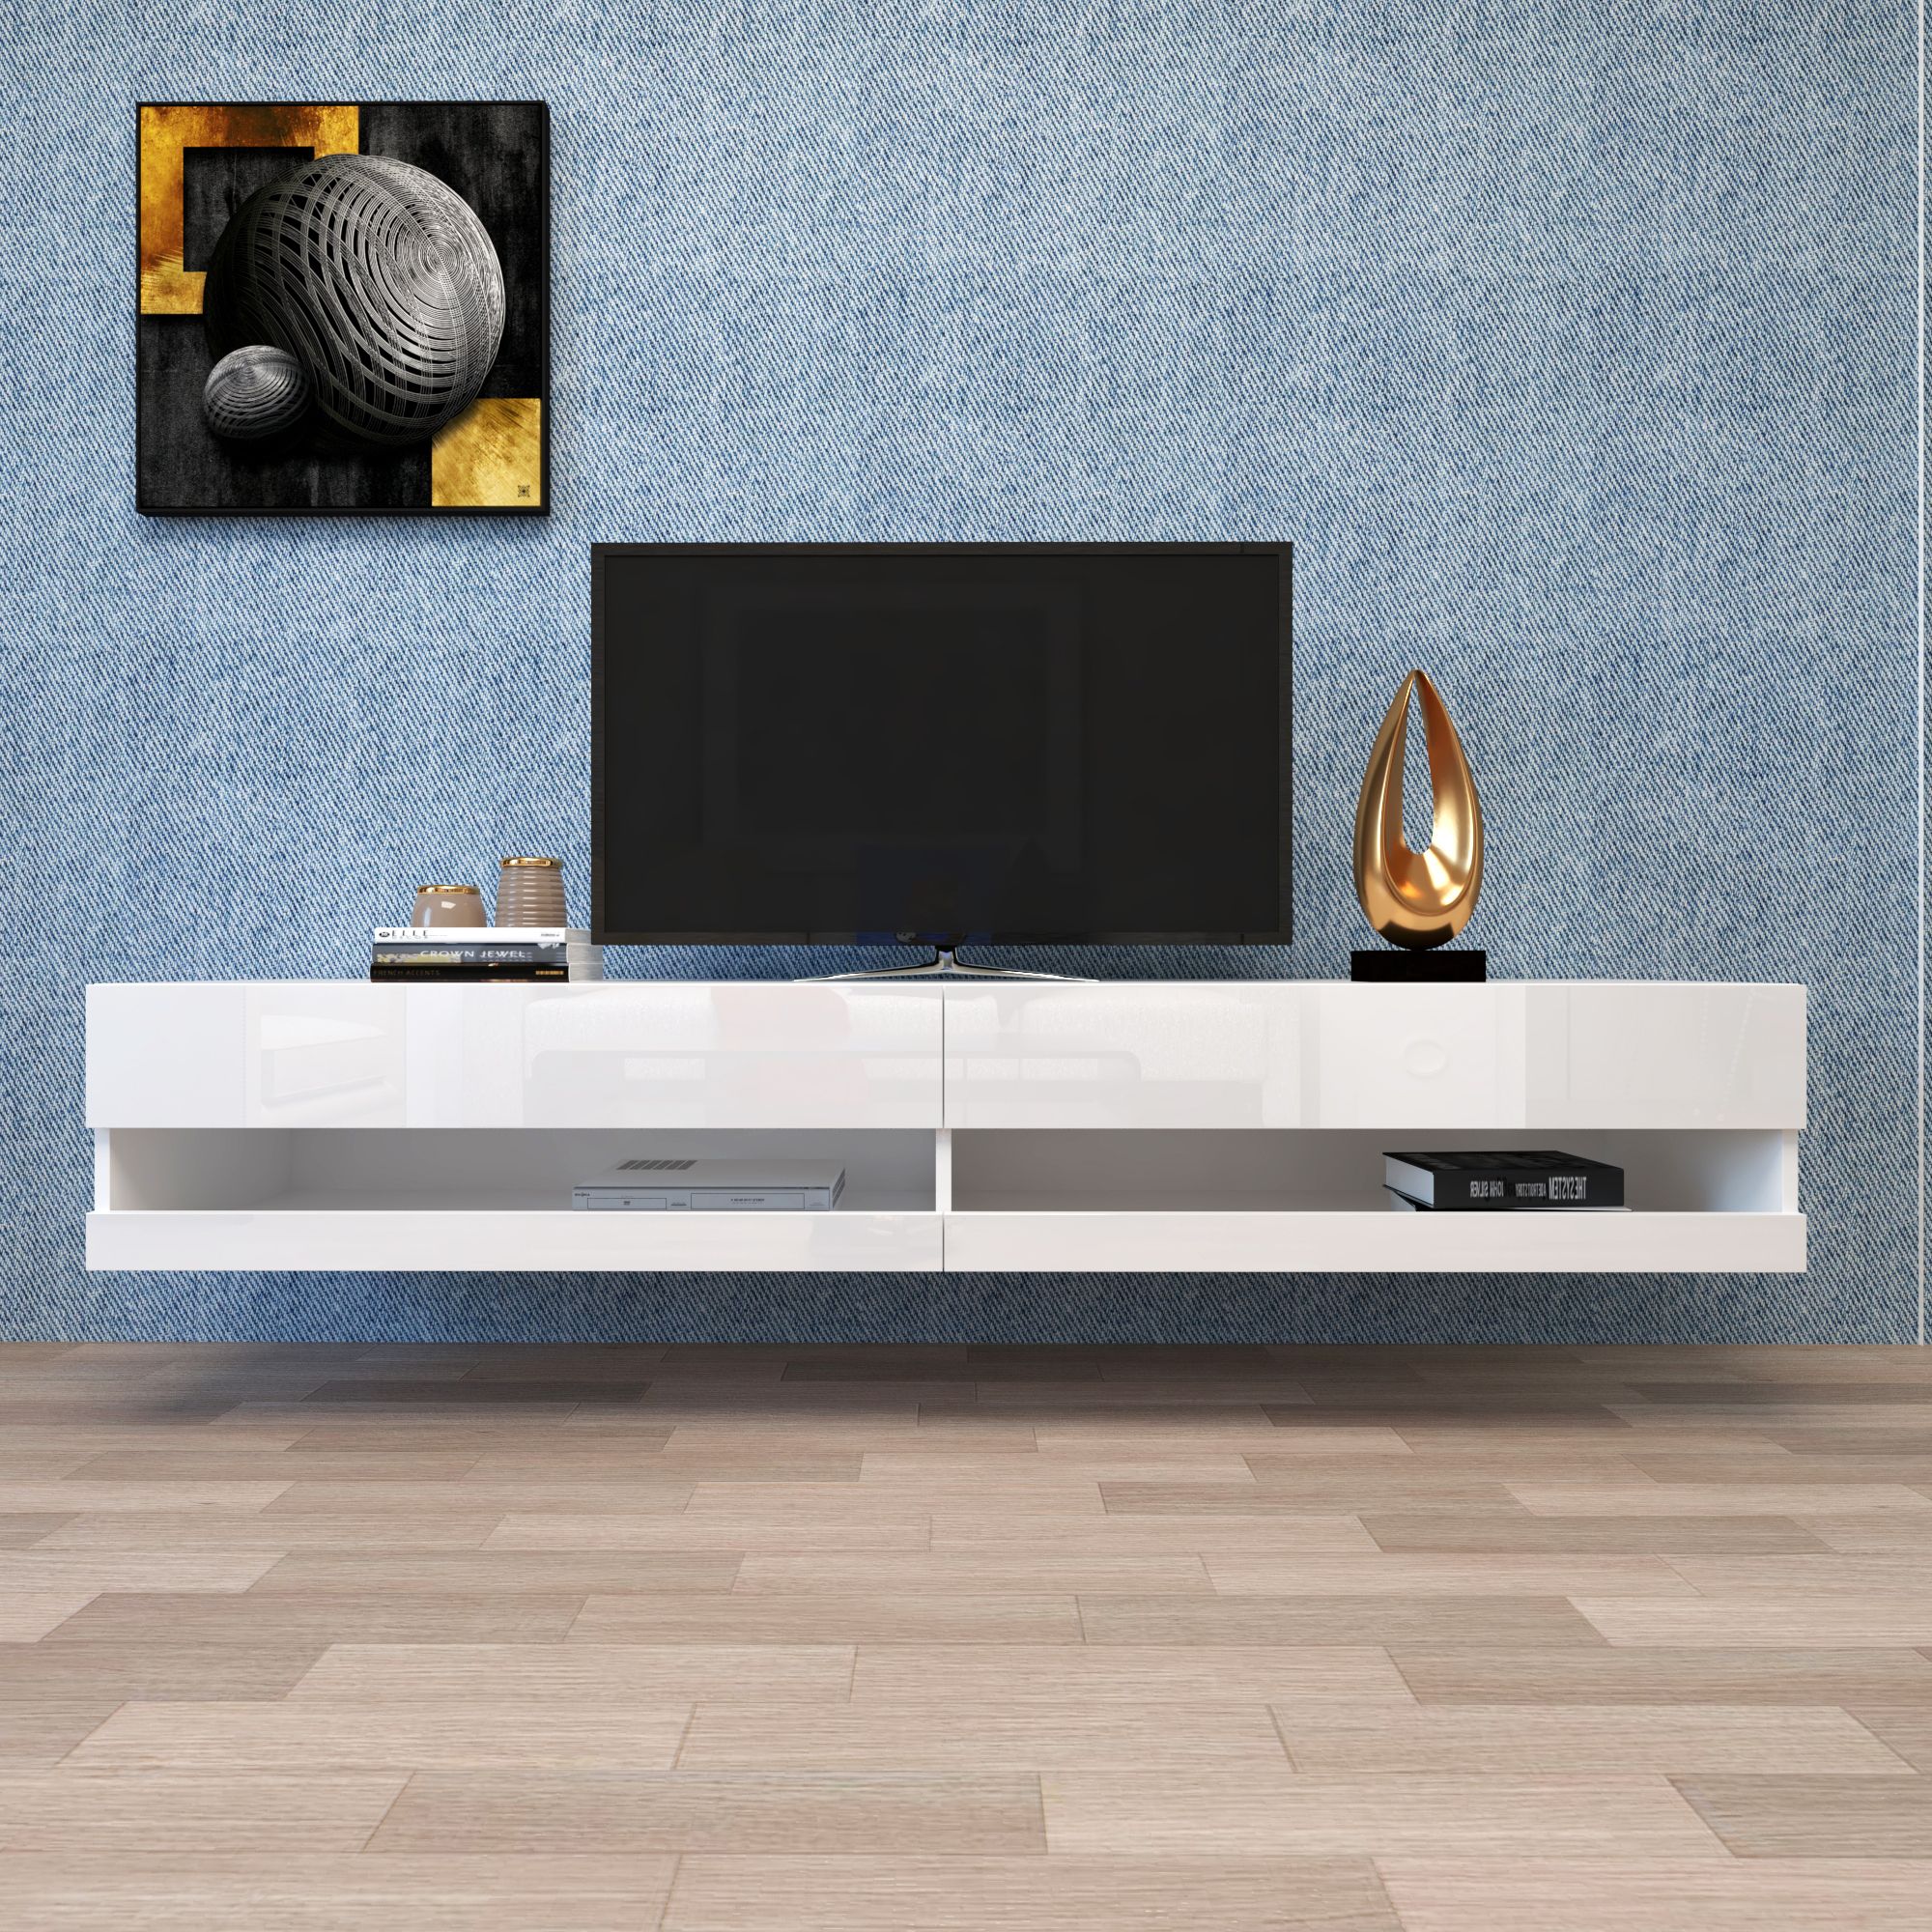 White Wall Mounted Tv Stand, Segmart Led Tv Cabinet For 80 In Wall Mounted Tv Stand Entertainment Consoles (View 9 of 15)